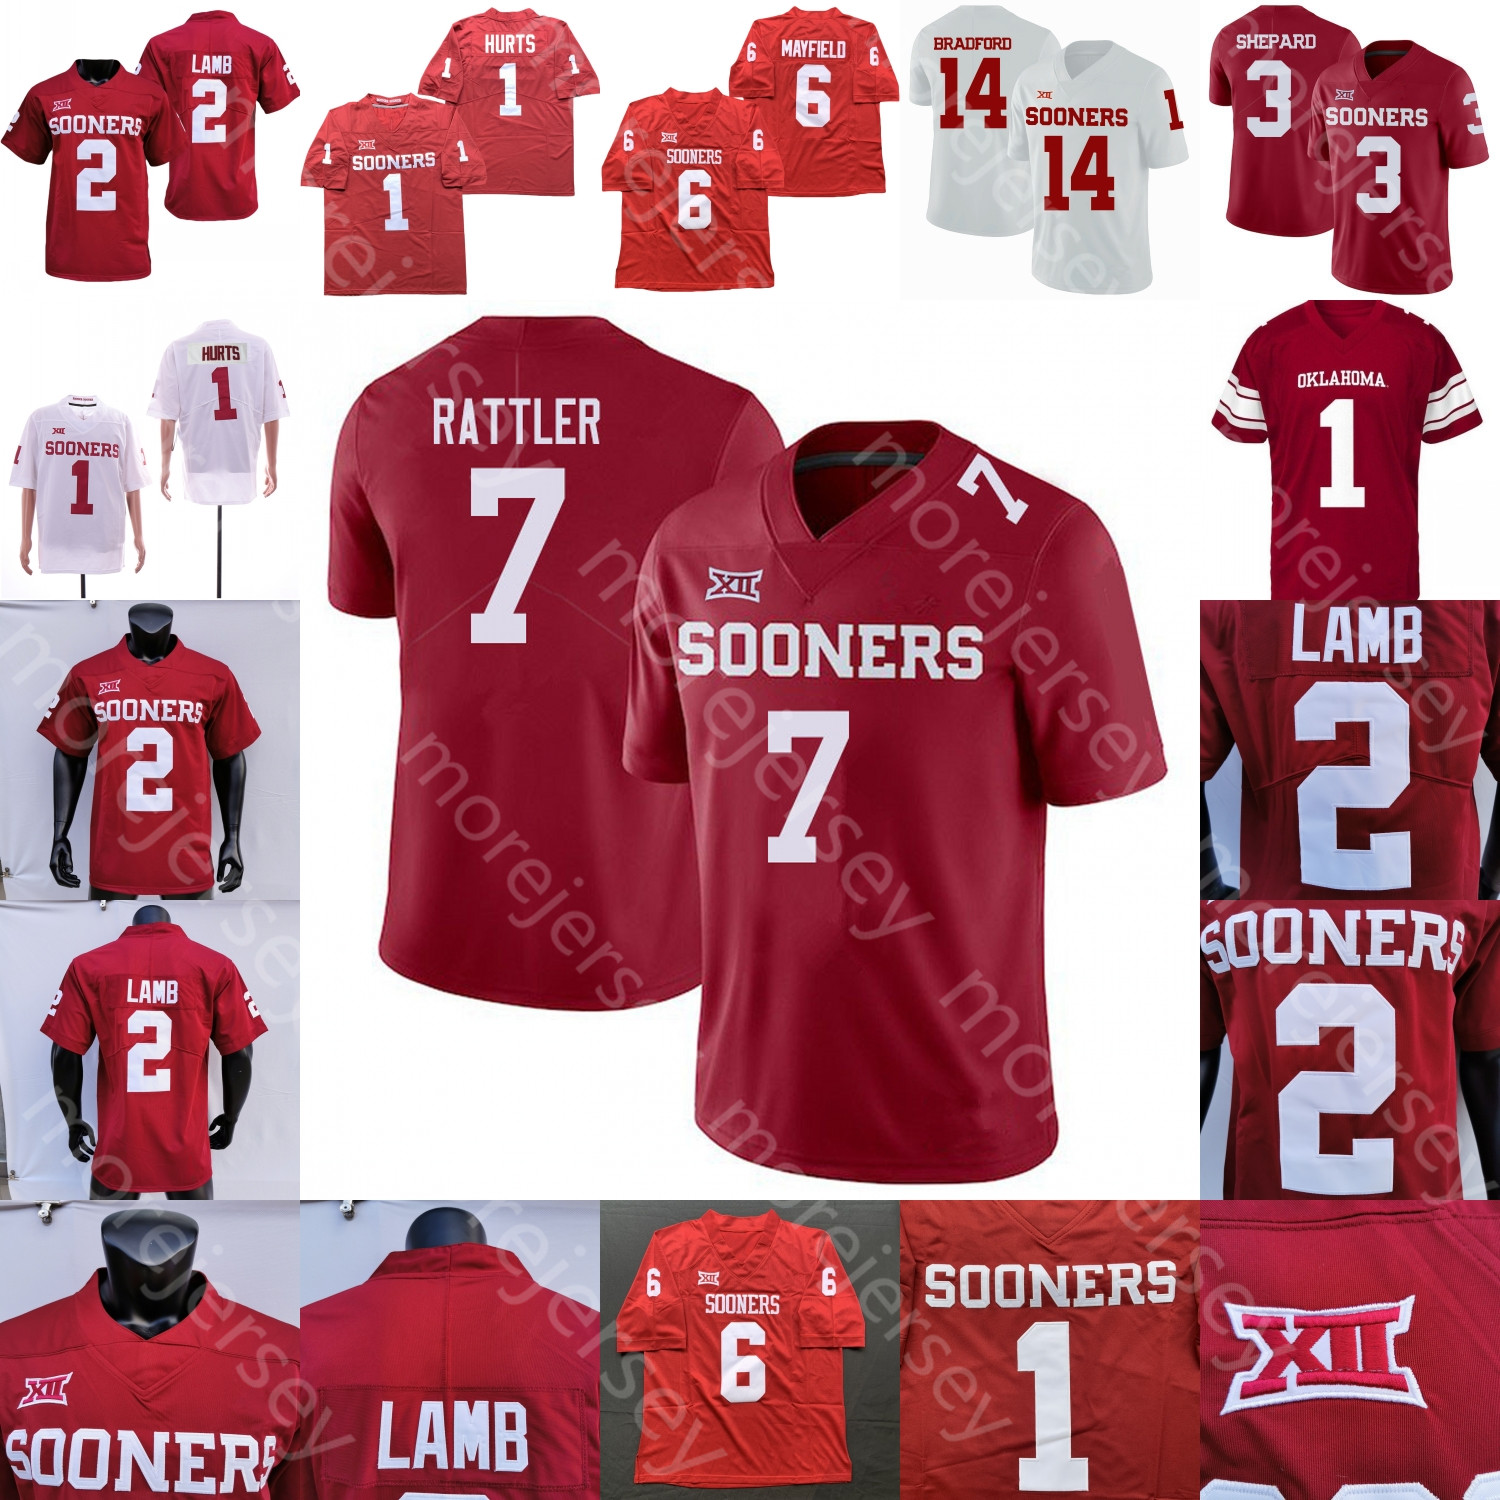 Oklahoma Sooners Football Jersey College Dillon Gabriel Kennedy Brooks Spencer Rattler Marvin Mims Eric Gray Caleb Williams Isaiah Thomas Perrion Winfrey Fields от DHgate WW